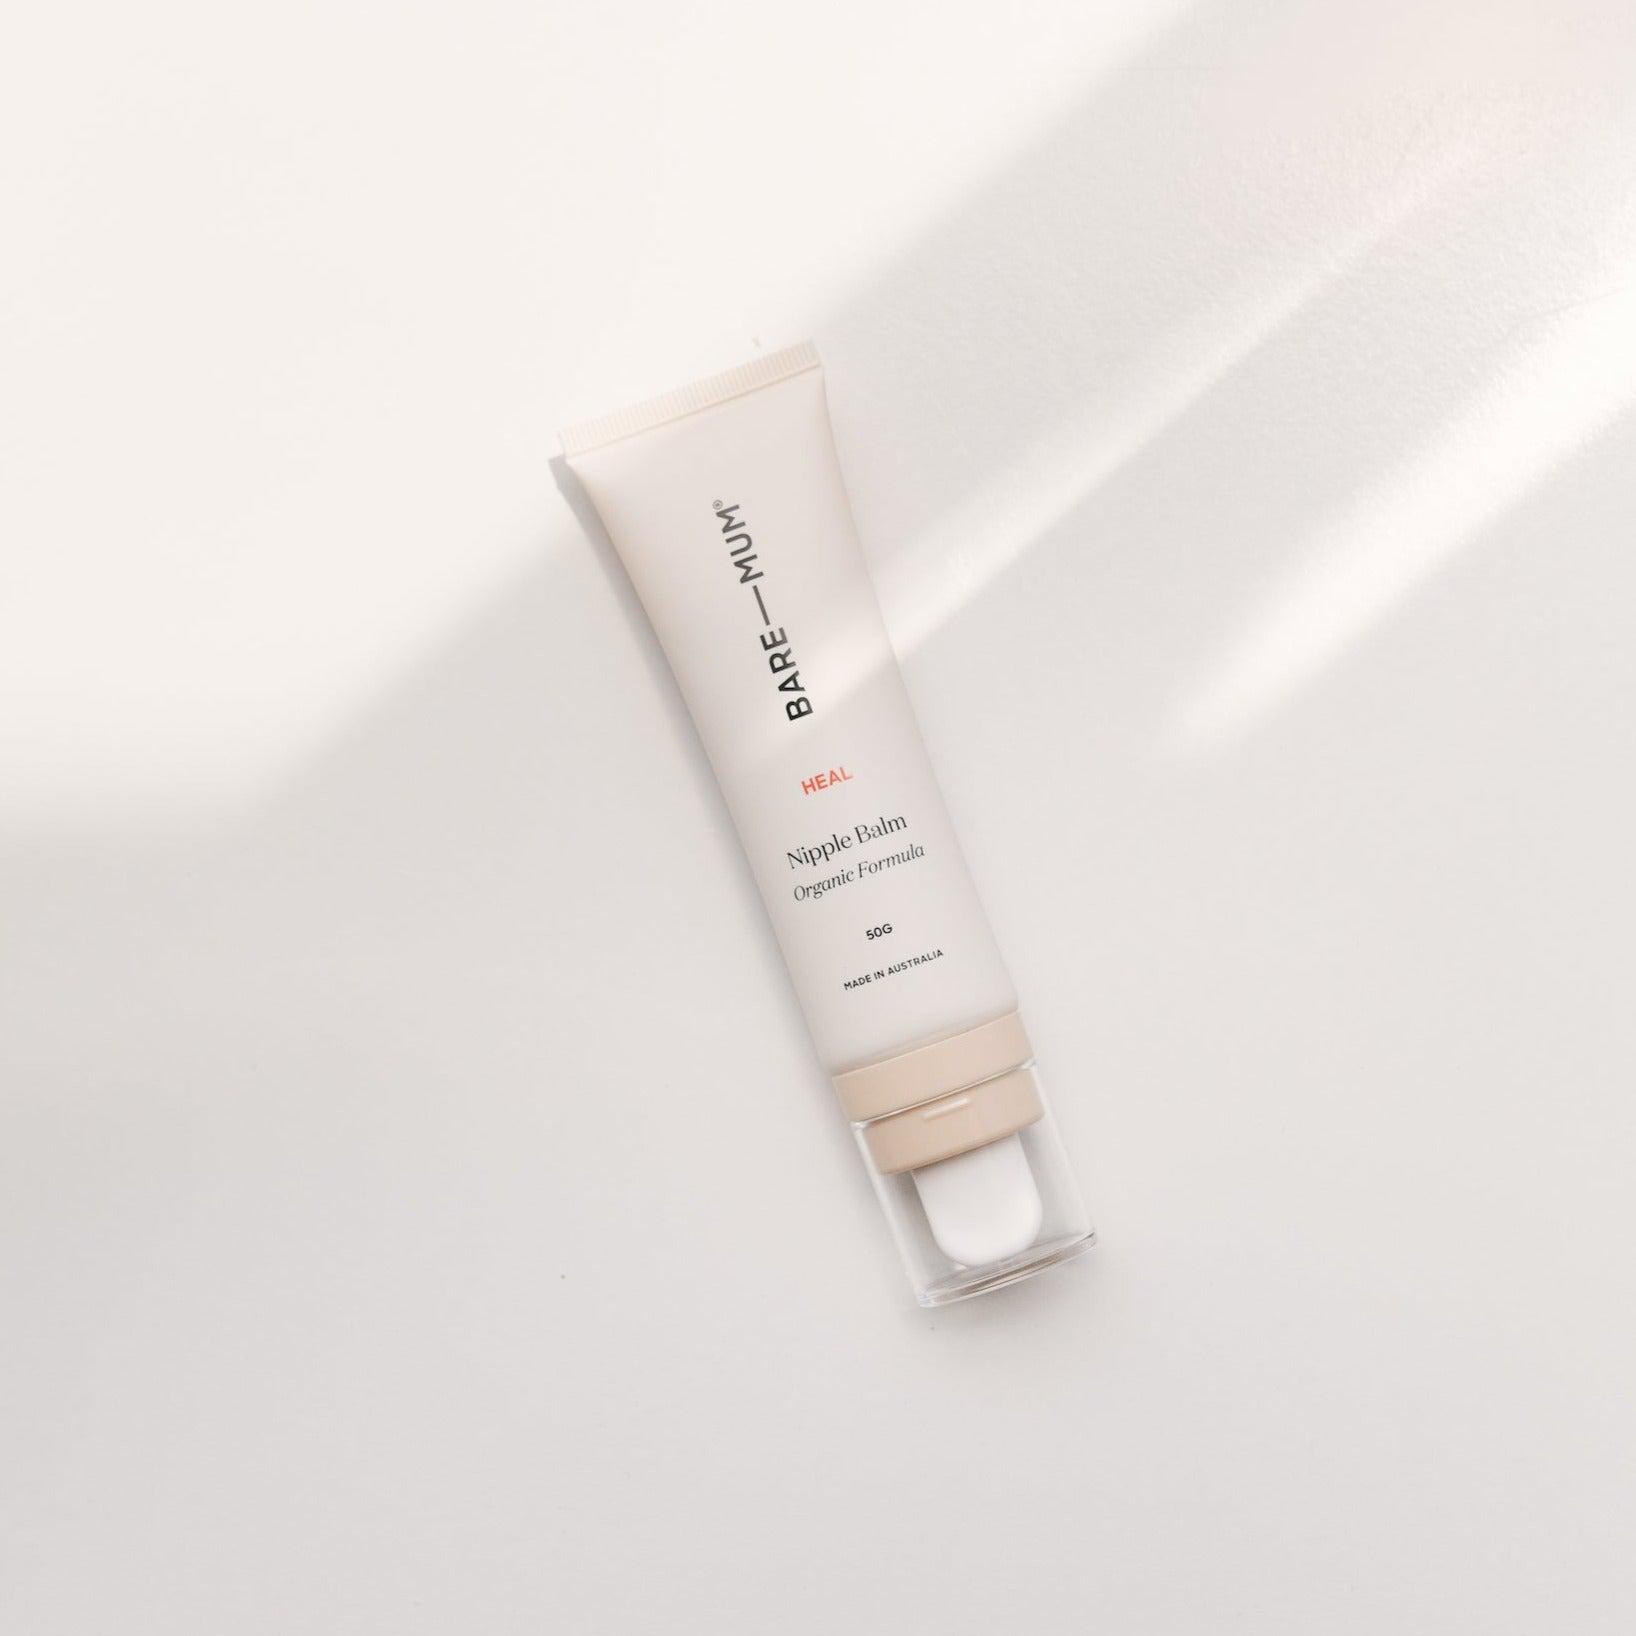 A tube of Bare Mum's Nipple Balm on a white surface for postpartum recovery.